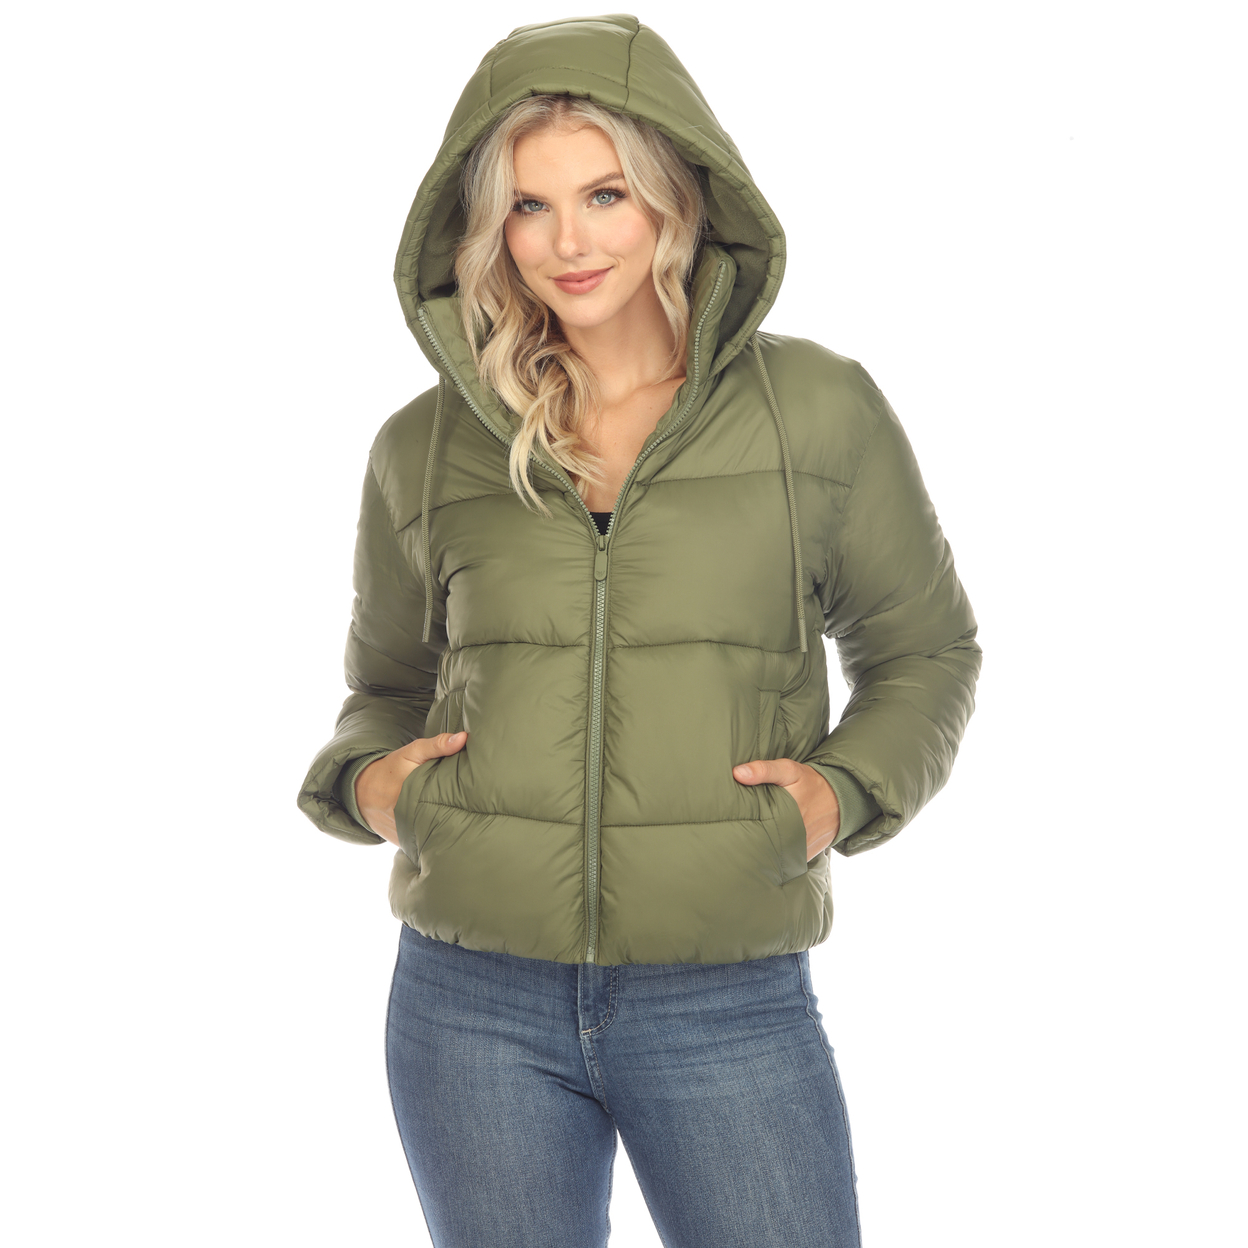 White Mark Women's Zip Hooded Puffer Jacket With Pockets - Olive, Small